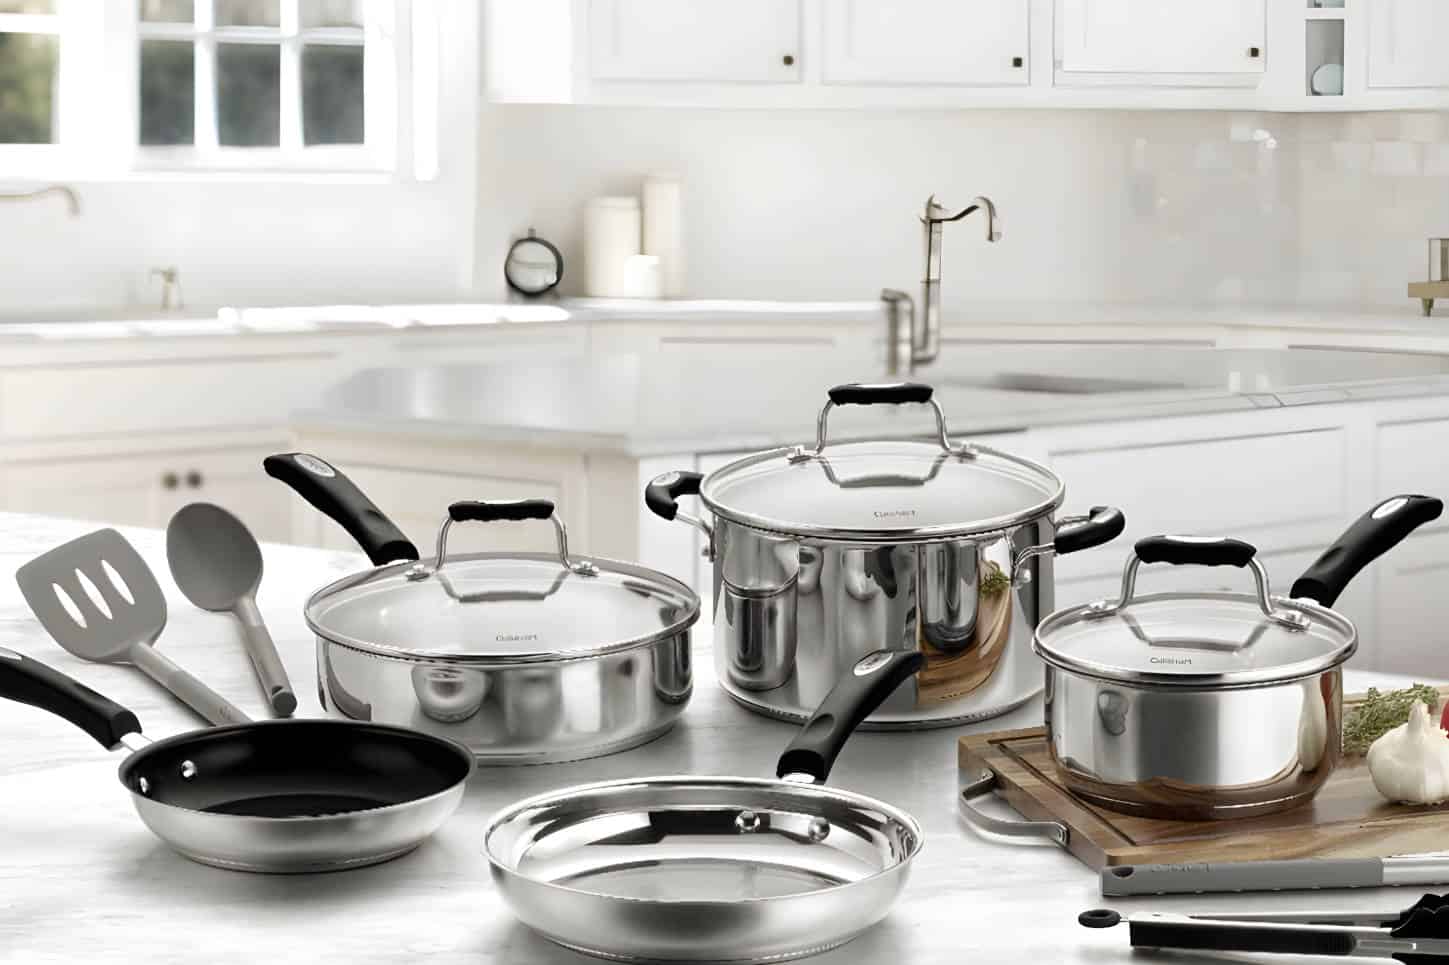 Cuisinart Stainless Steel Pots and Pans Features